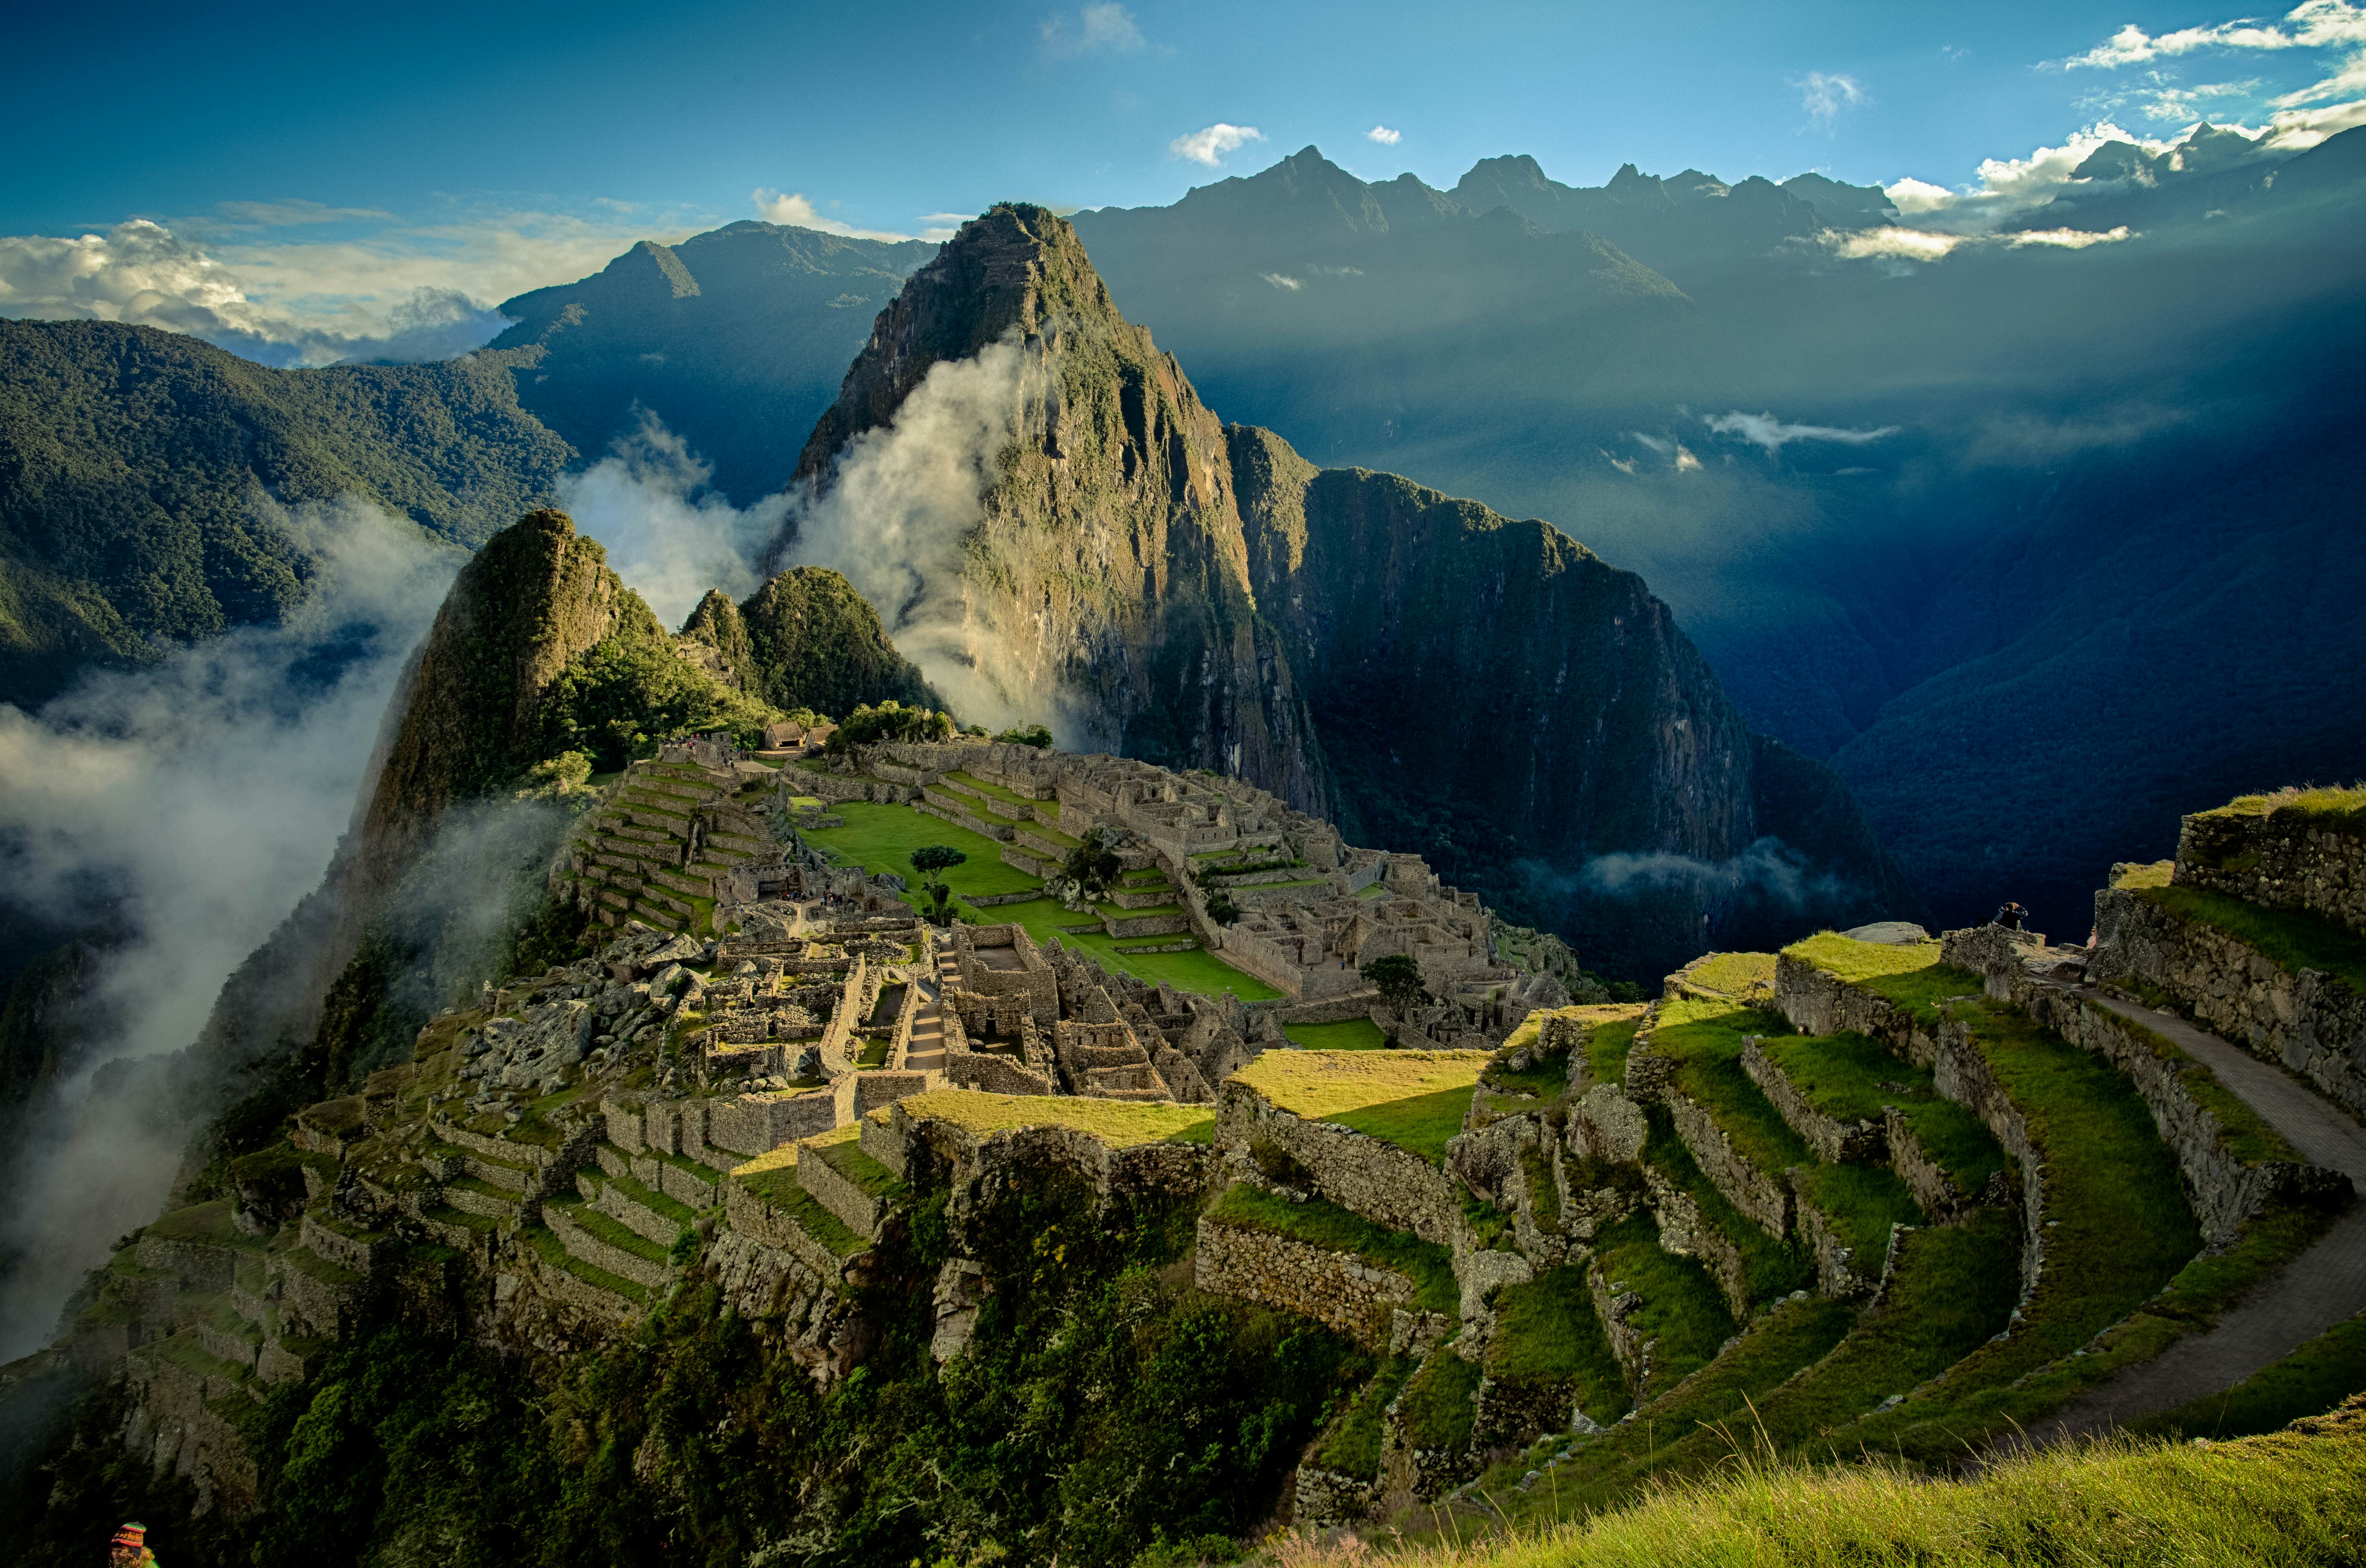 machu picchu is part of what ancient civilization and where is it?